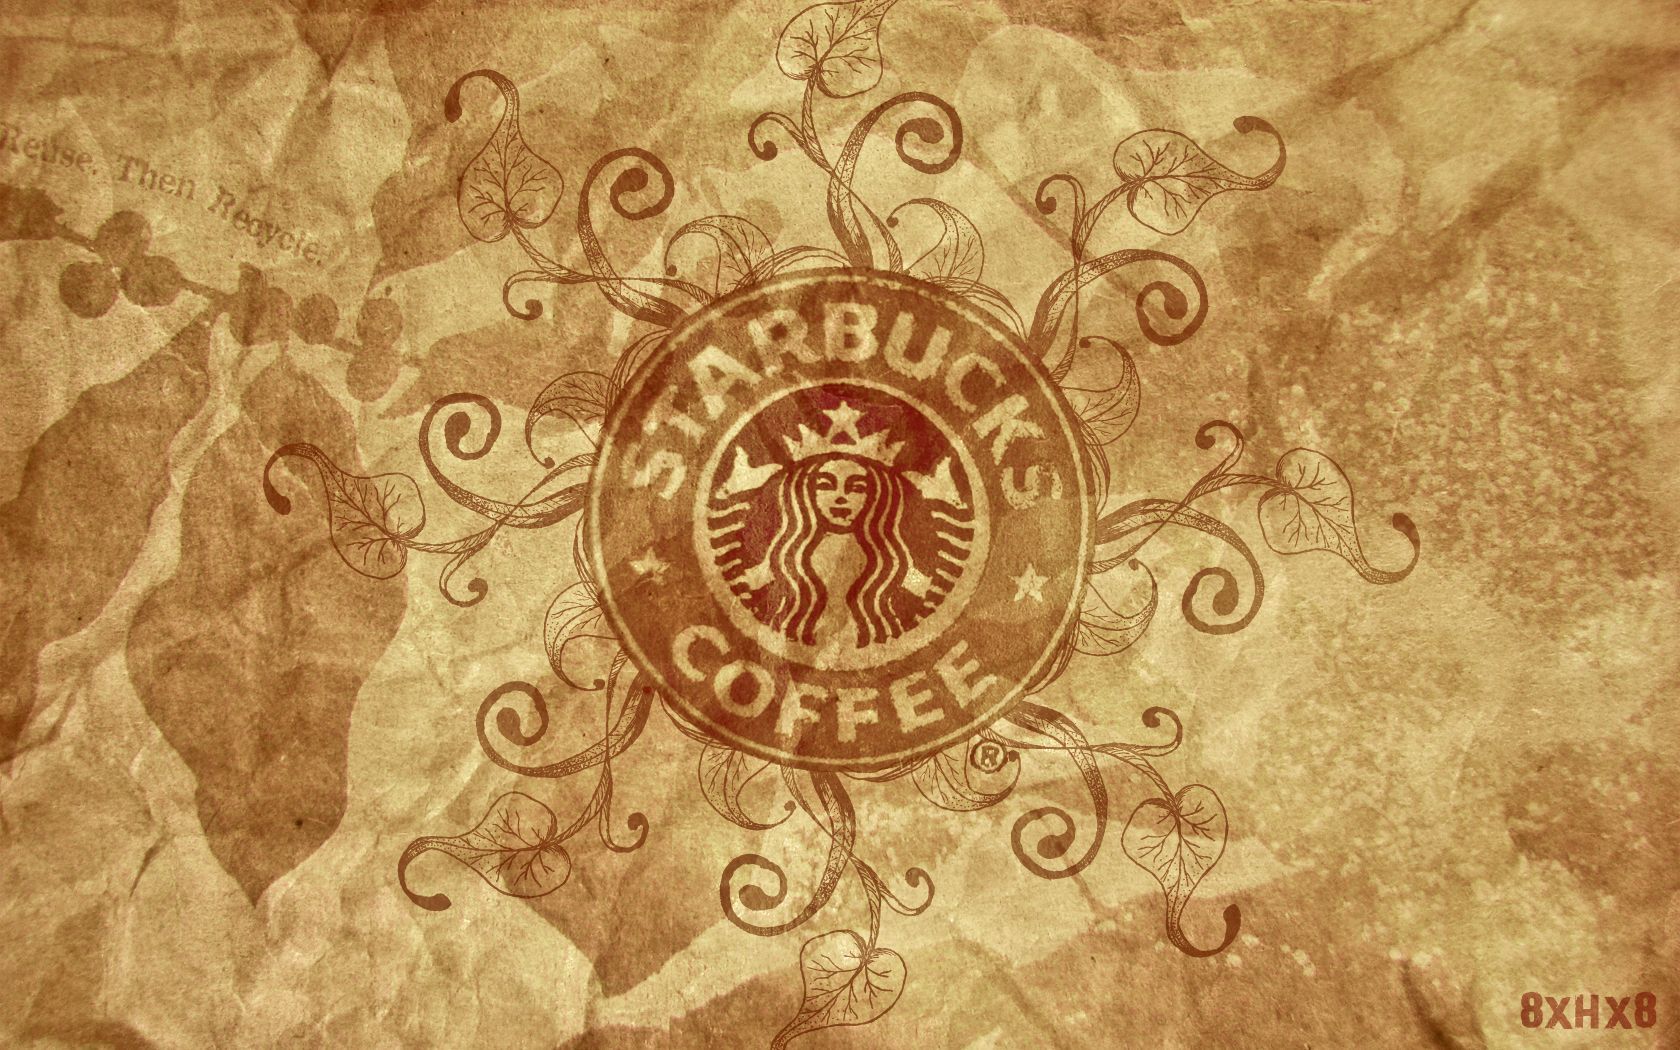 Love Starbucks Wallpapers Hd High Definitions Backgrounds